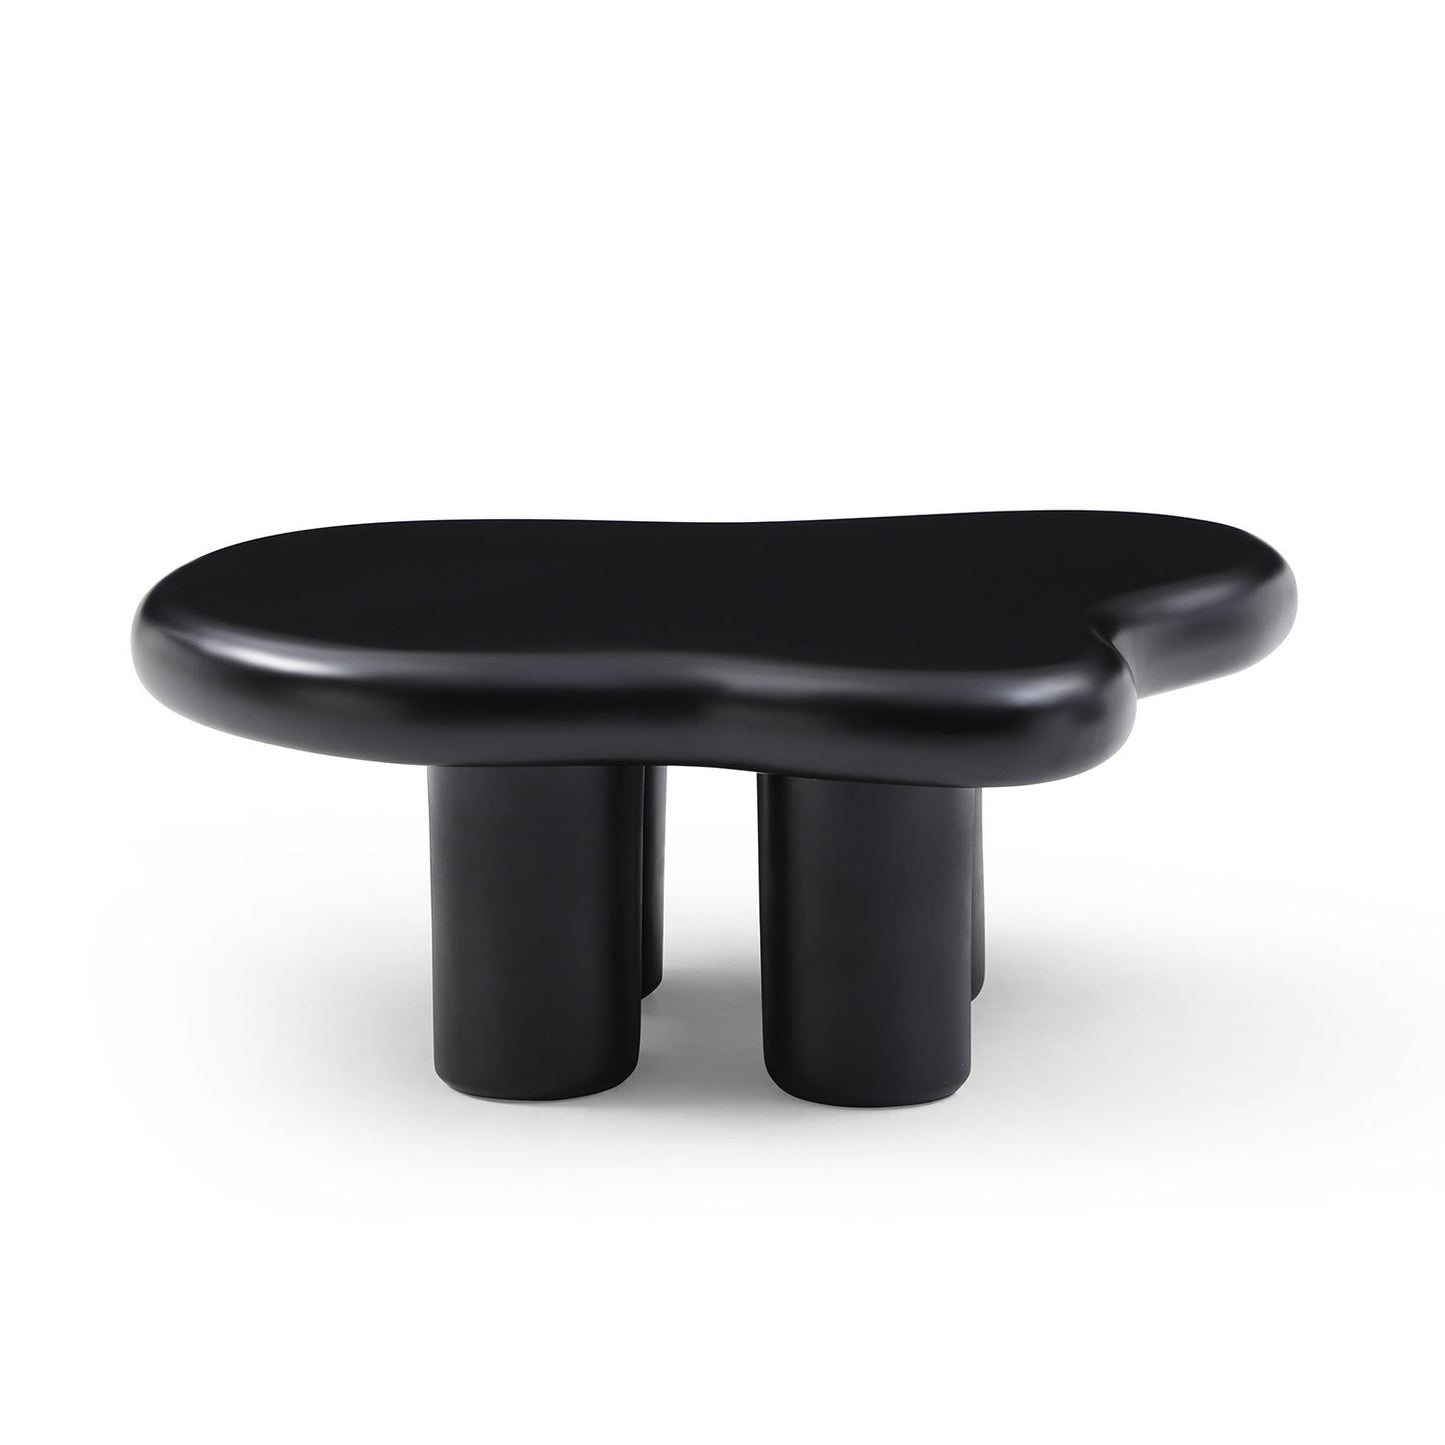 Unique Cloud-Shaped Coffee Table for Your Living Space, Black, 35.43inch